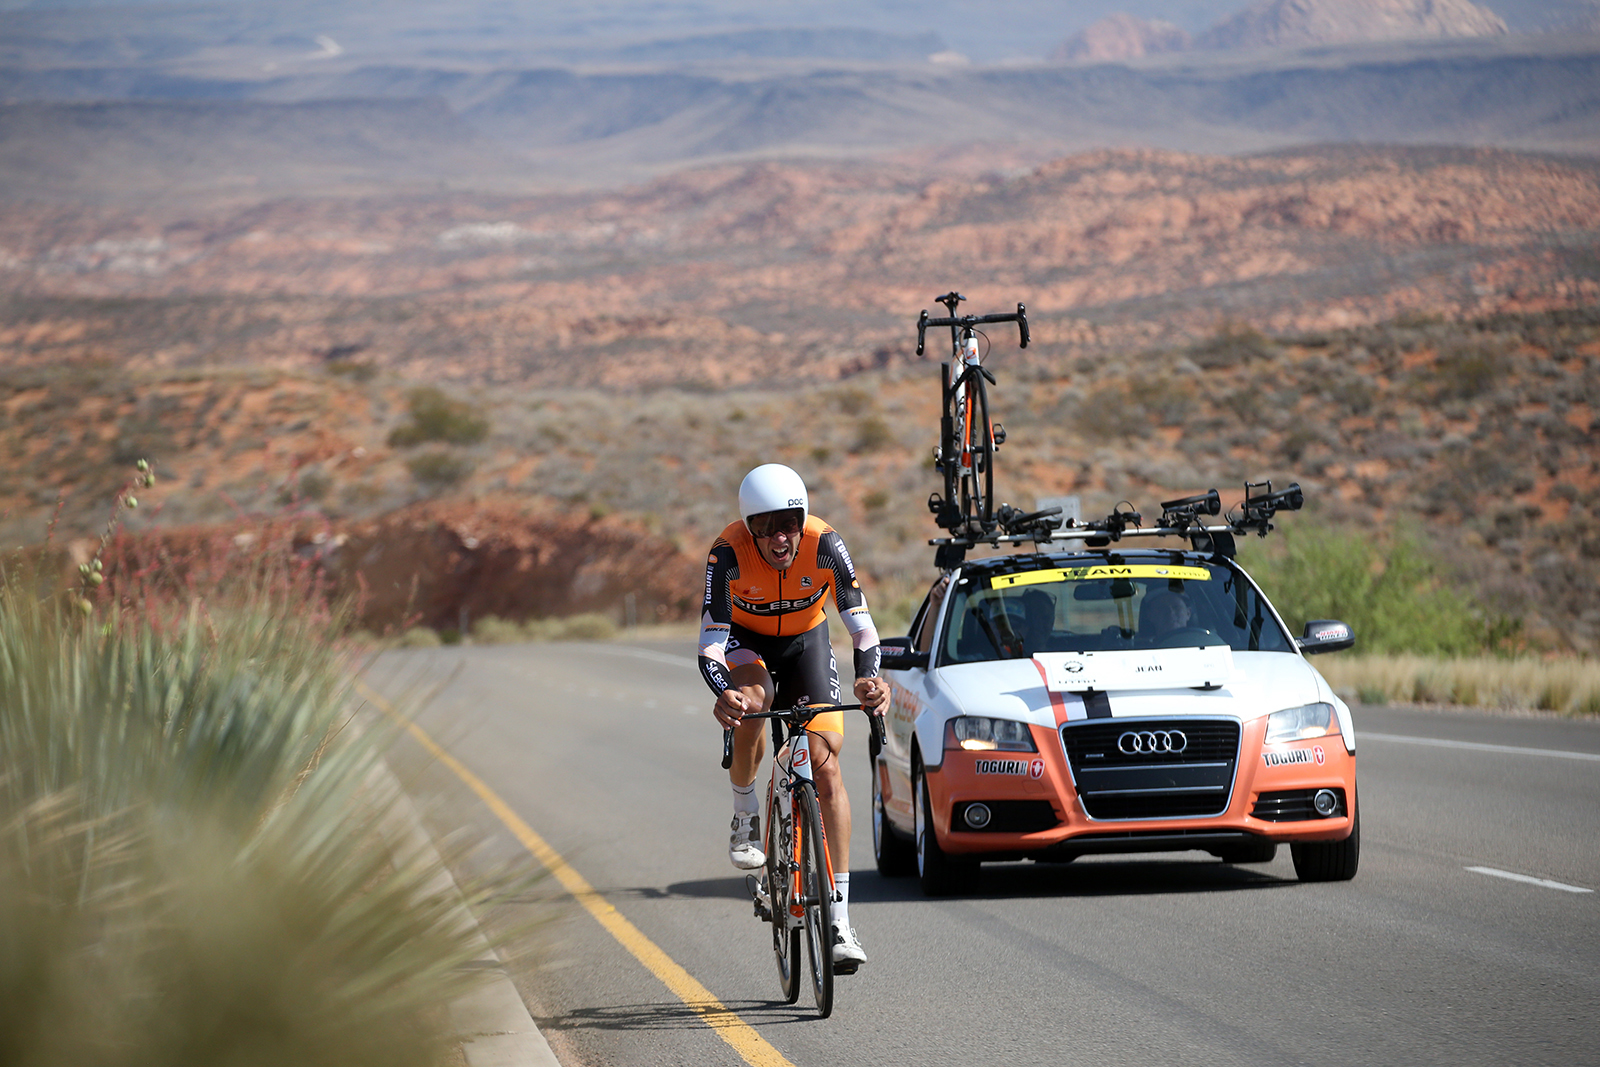 Silber Pro Cycling races the Prologue set in the redrocks of St. George. 2018 Tour of Utah Team Prologue, August 6, 2018, St. George, Utah. Photo by Cathy Fegan-Kim, cottonsoxphotography.net